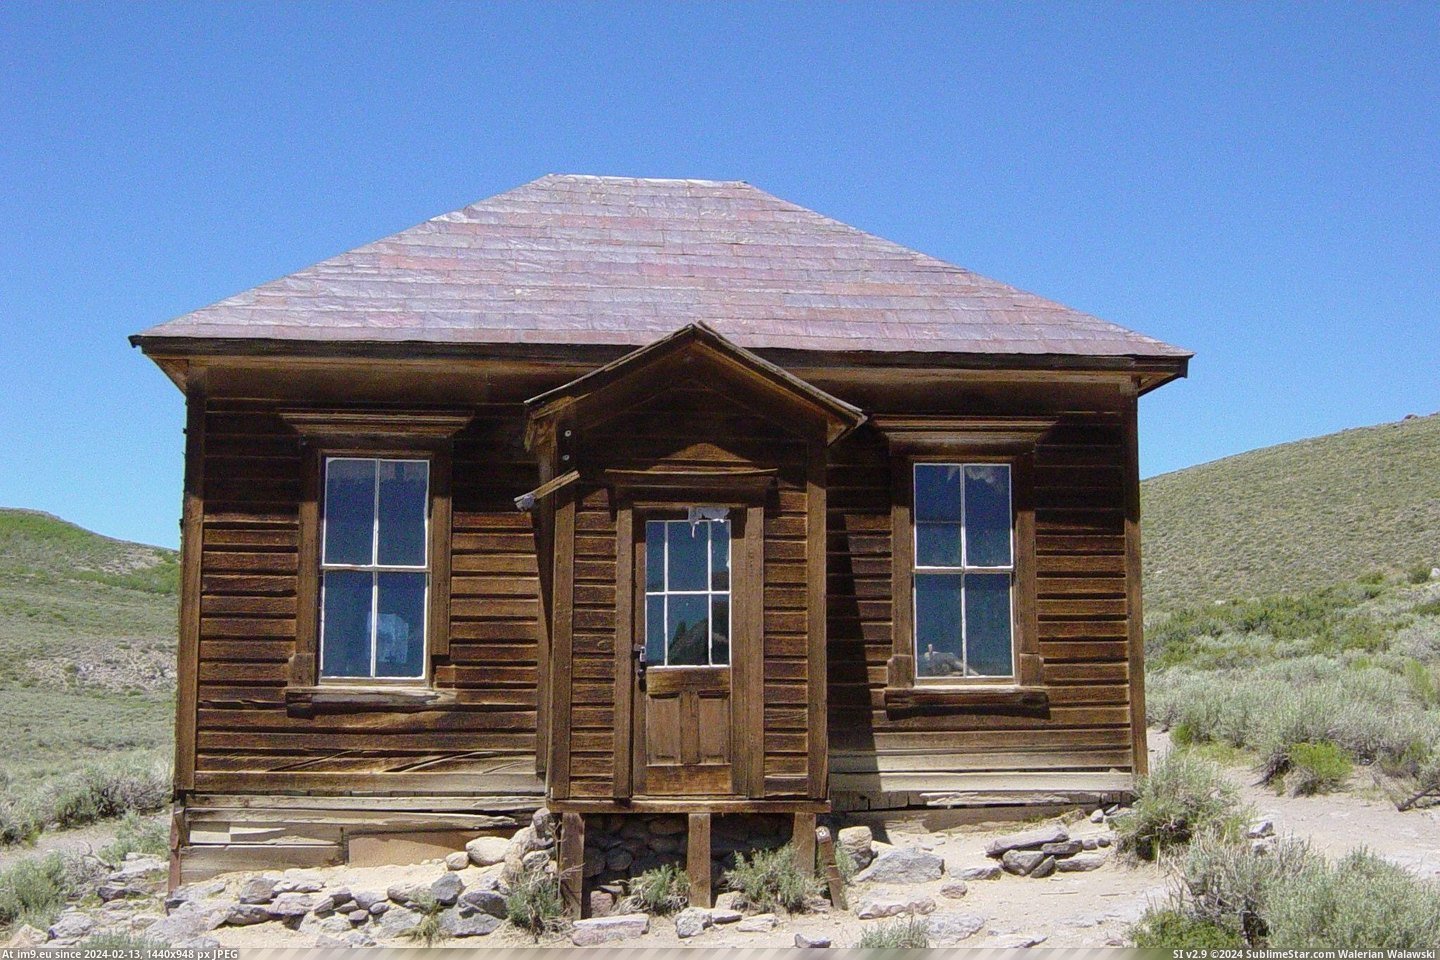 #California #Bodie #Donald #House Mc Donald House In Bodie, California Pic. (Image of album Bodie - a ghost town in Eastern California))